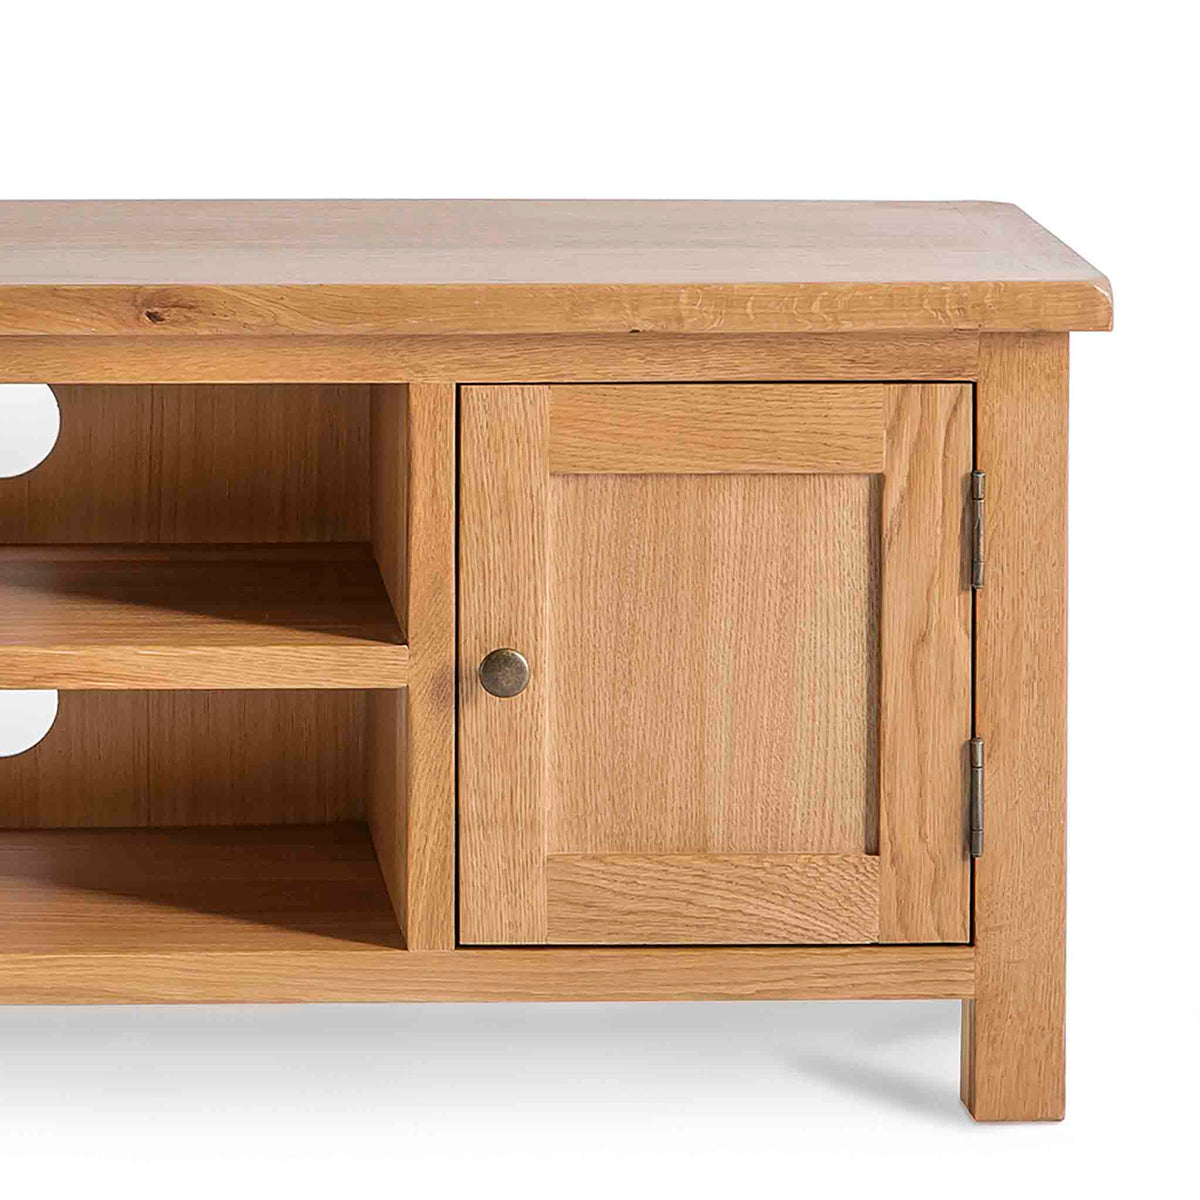 Surrey Oak TV Stand 120cm - Close up of top and lower cupboard